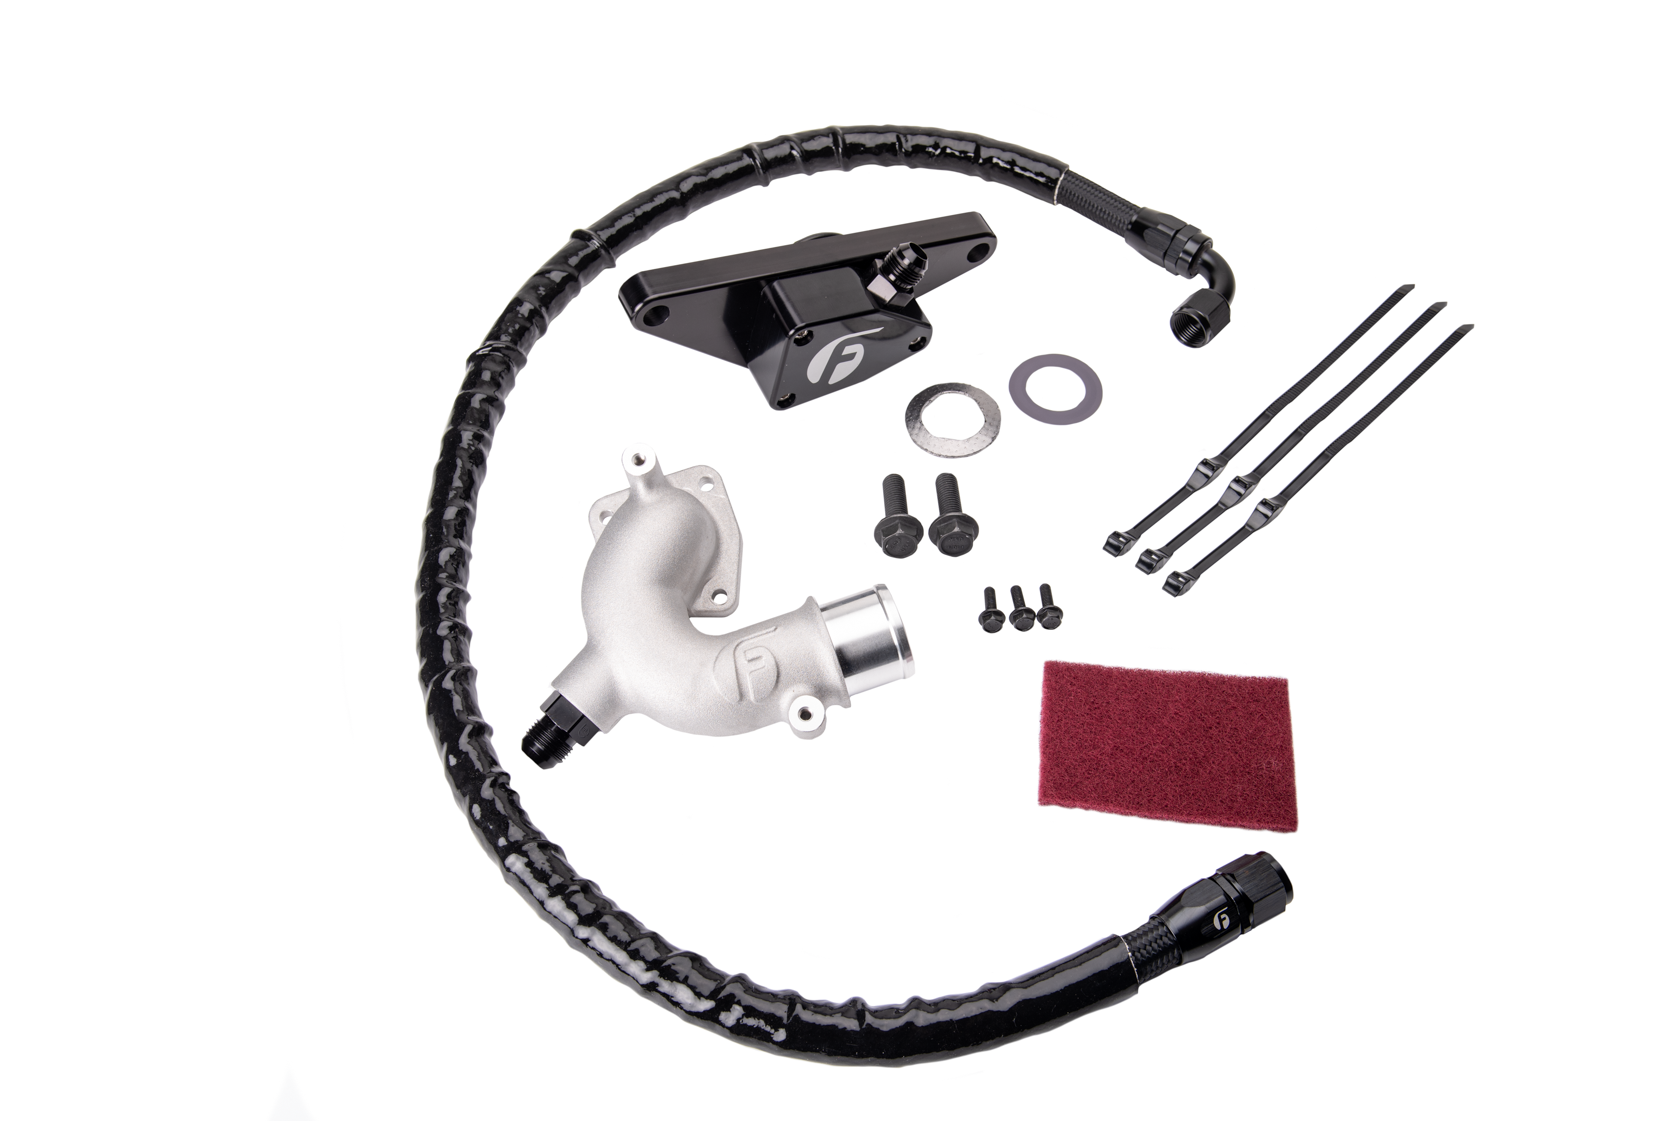 FPE-CLNTBYPS-CUMMINS-1318 Fleece Coolant Bypass Kit for 2013-2018 RAM with 6.7L Cummins Hell On Wheels Canada